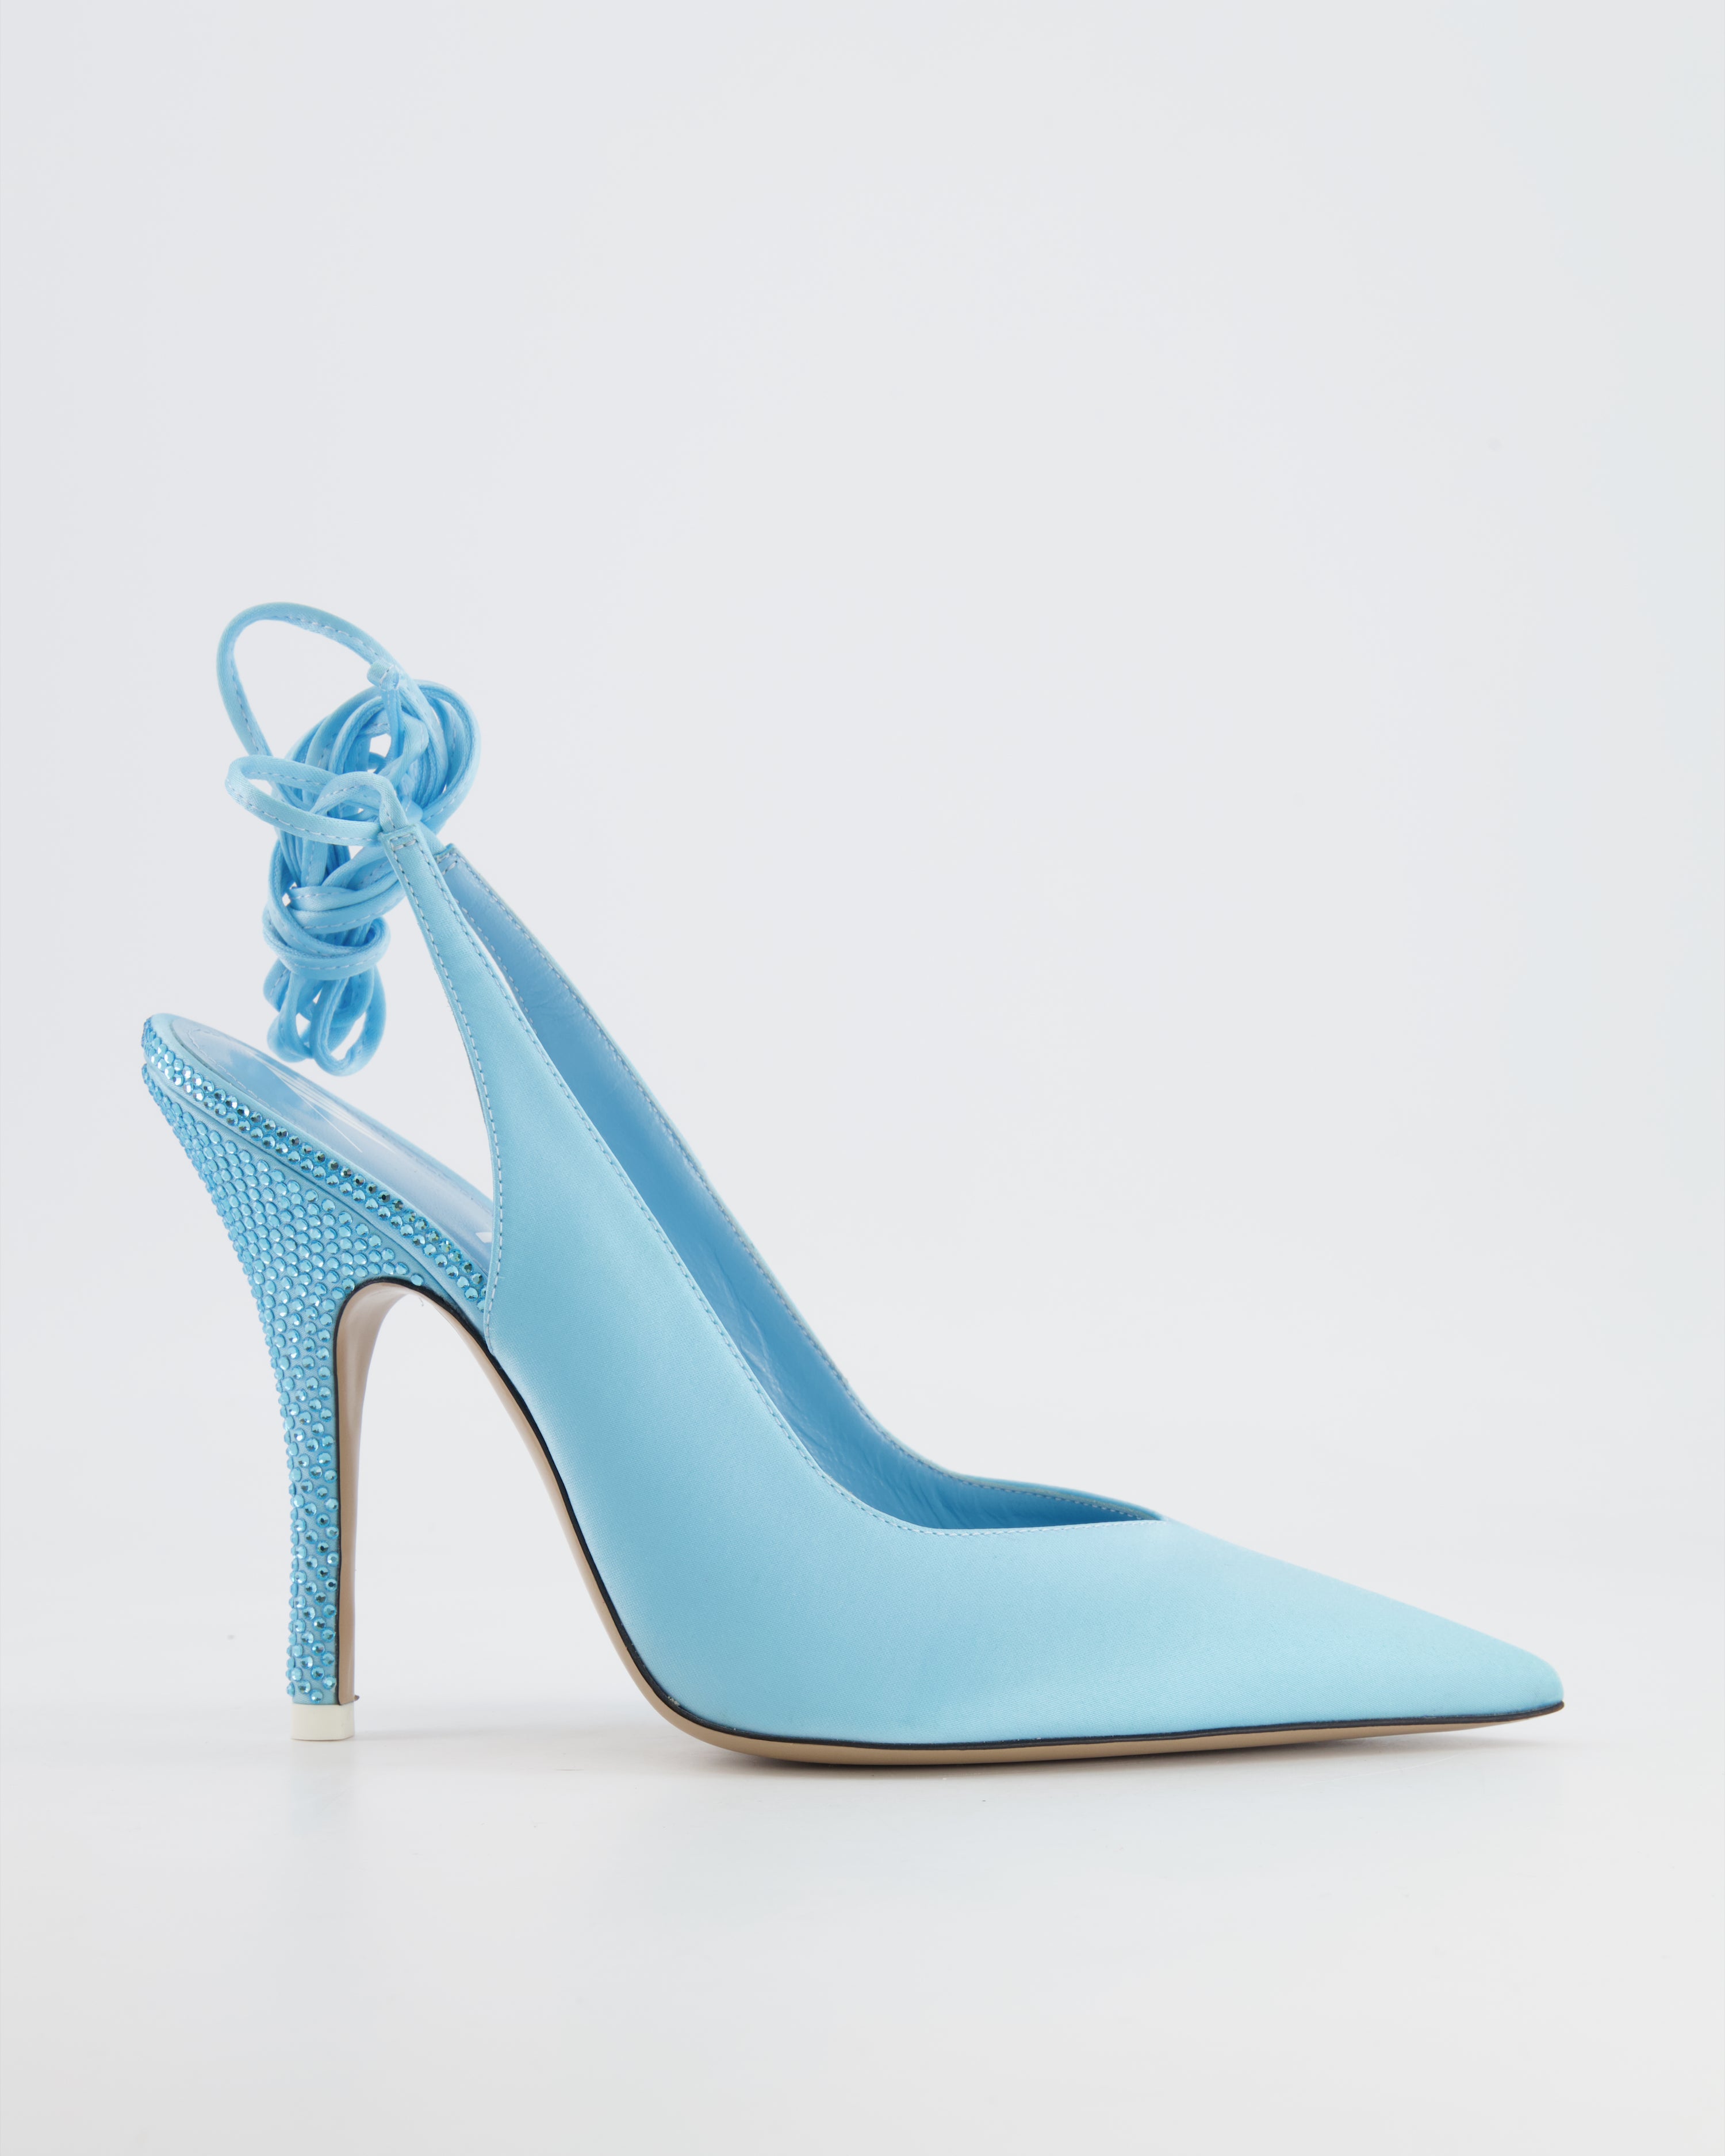 Women's Bead-Embellished Stiletto Heels - Pointed Toes / Ankle Straps / Blue